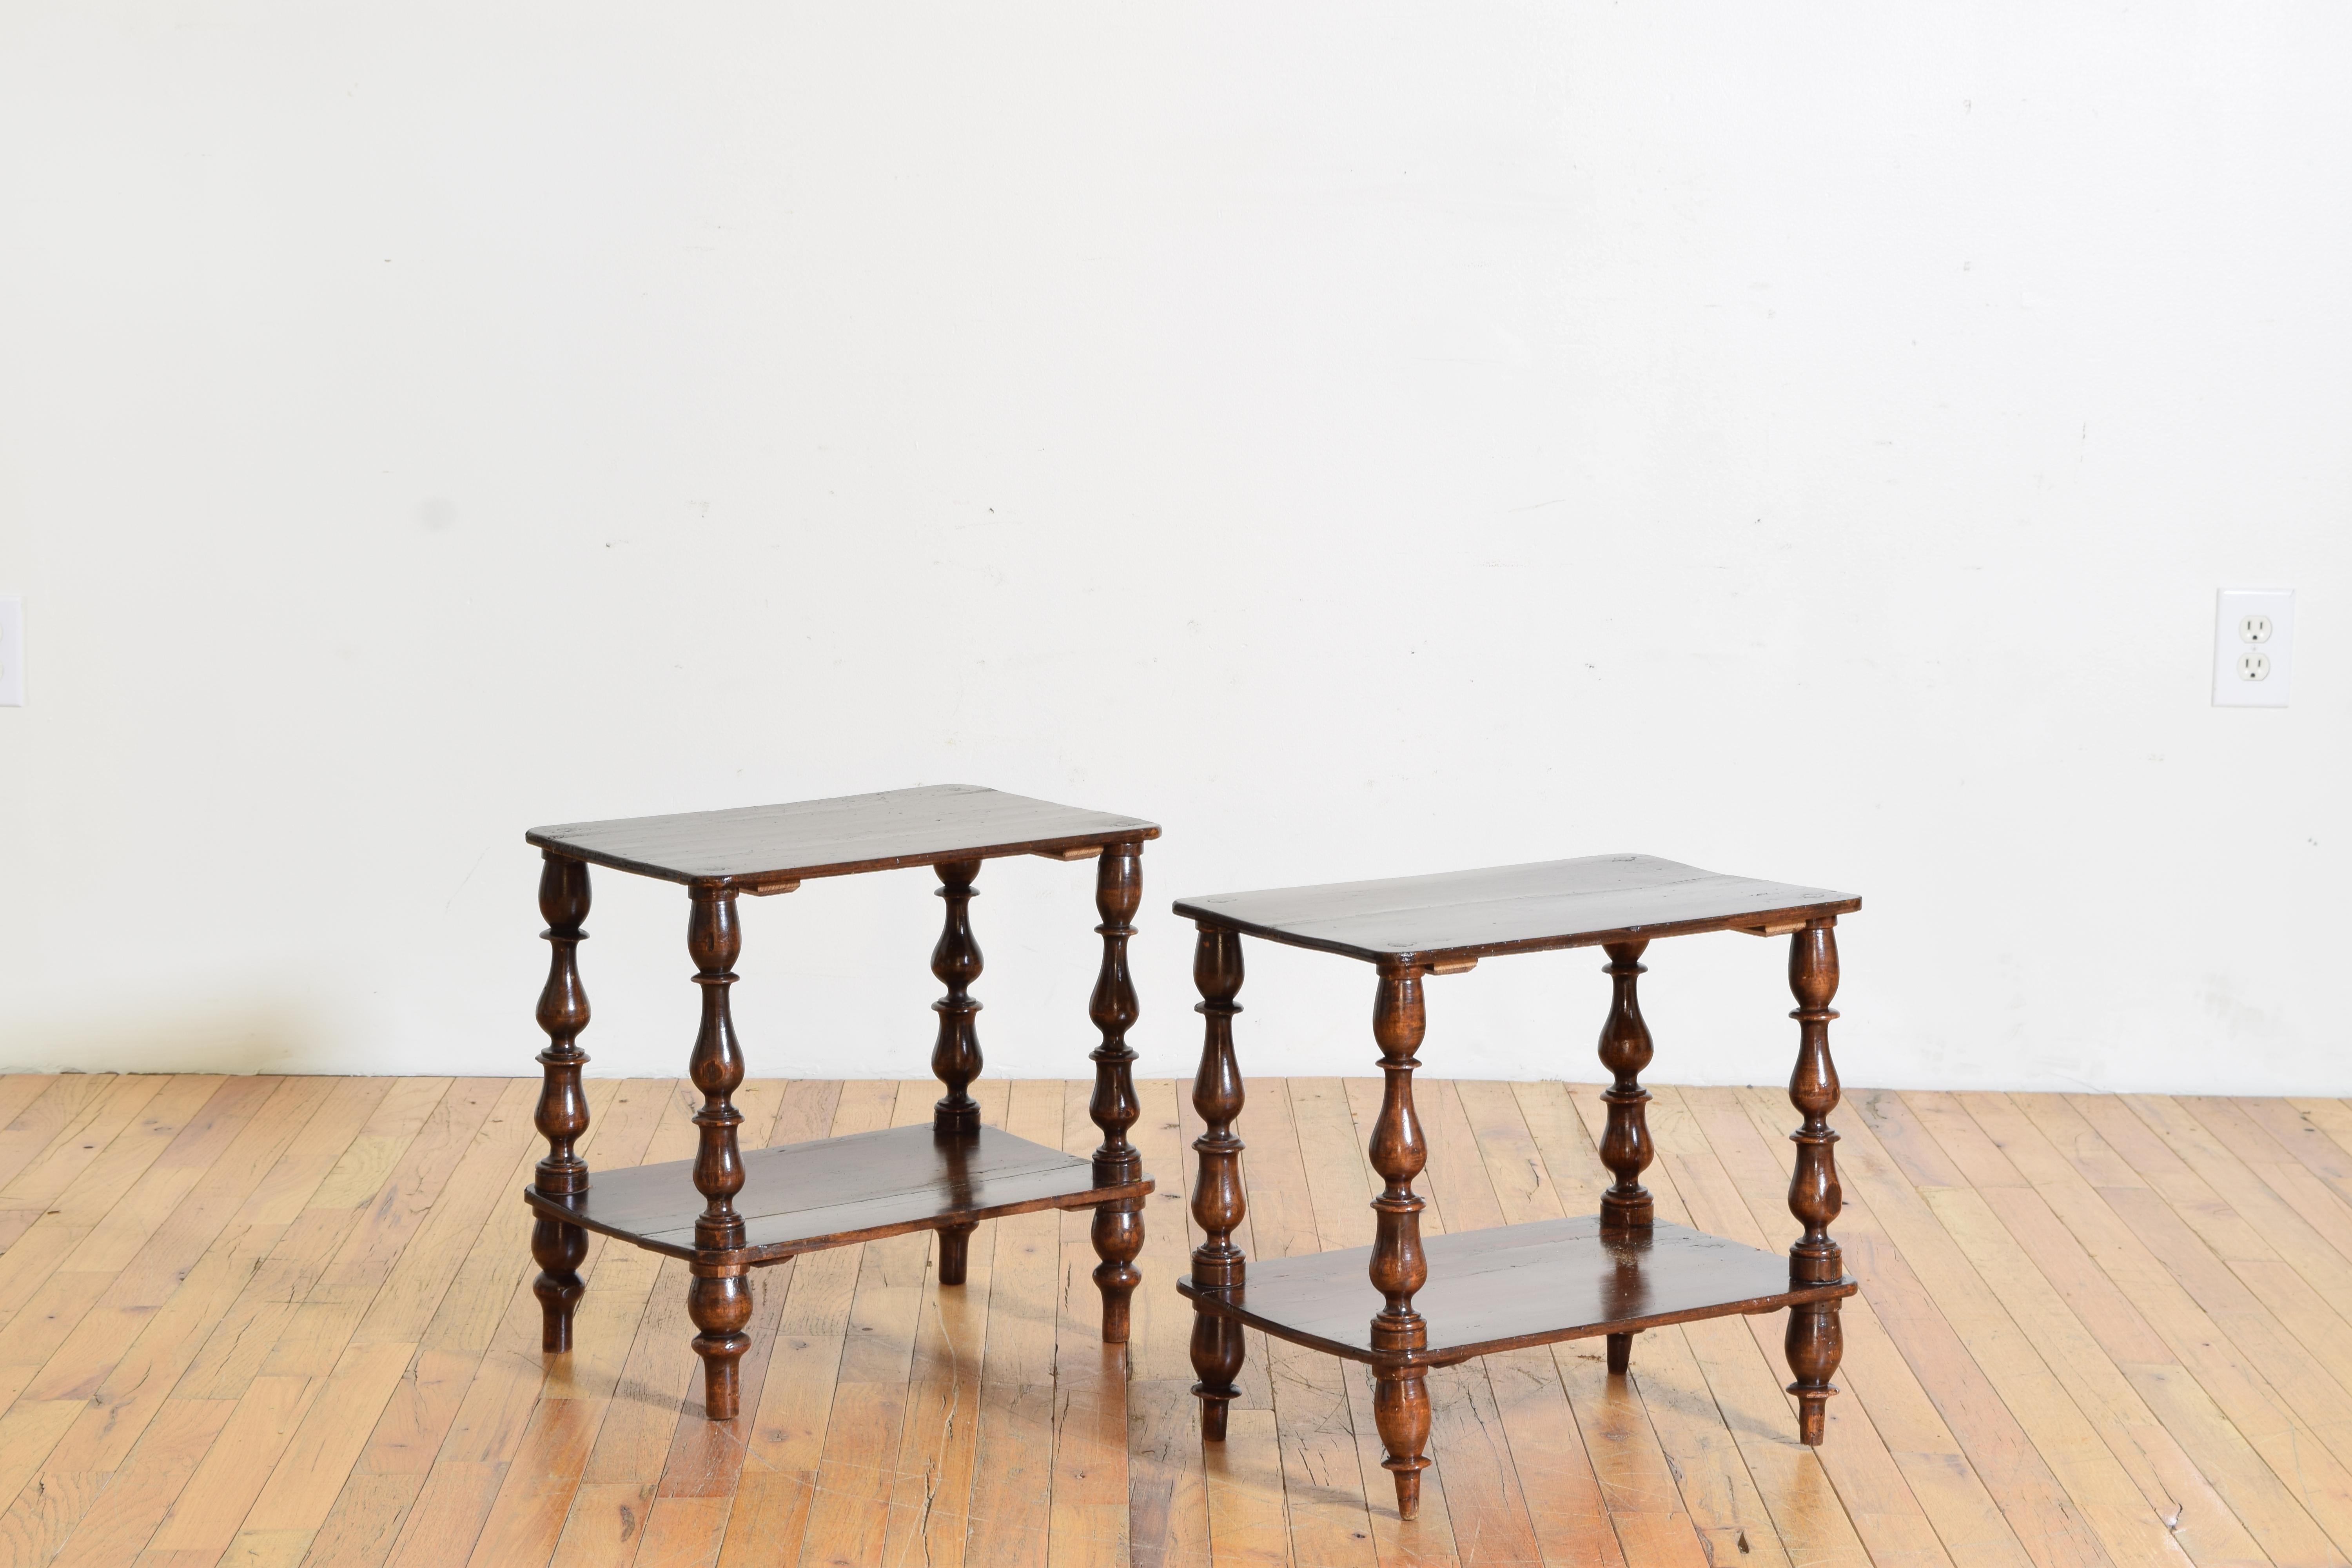 Each table having a rectangular top with rounded corners with conforming lower tiers, joined by turned legs and feet